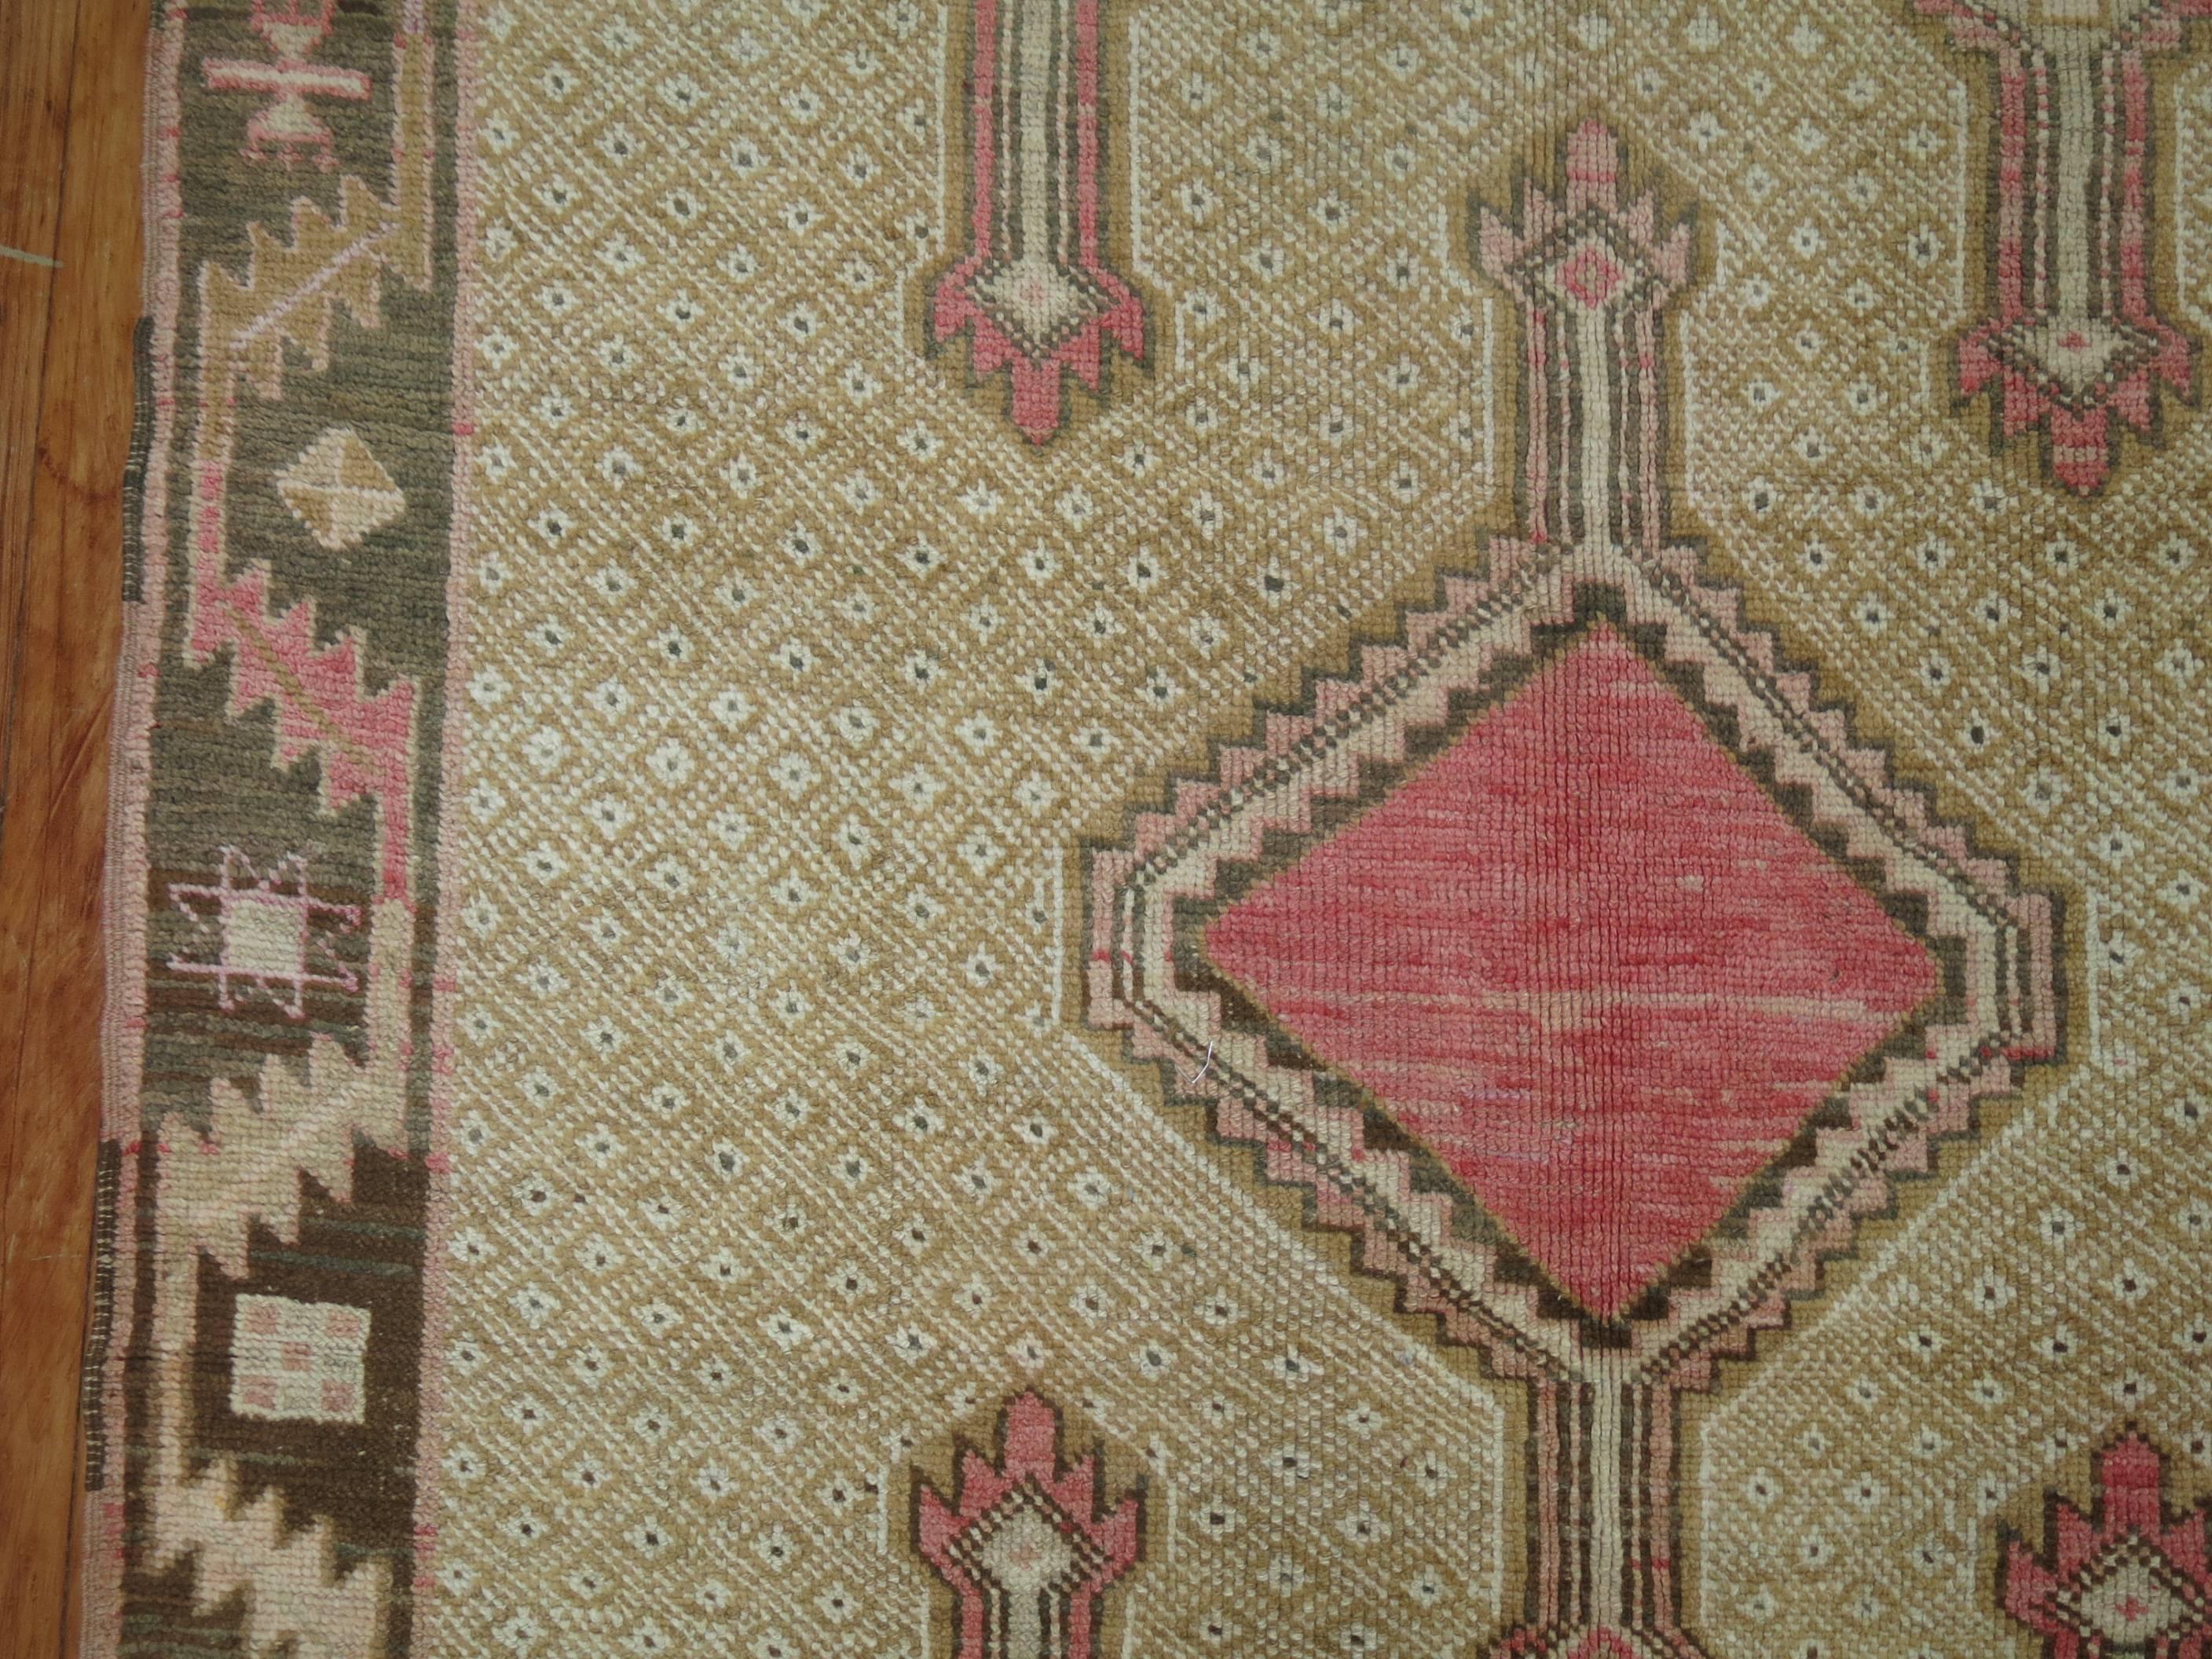 Quirky mid-20th century Turkish gallery rug. Pink and brown medallions on a khaki ground and brown border, circa 1940.

Size: 4'7” x 12'5”.